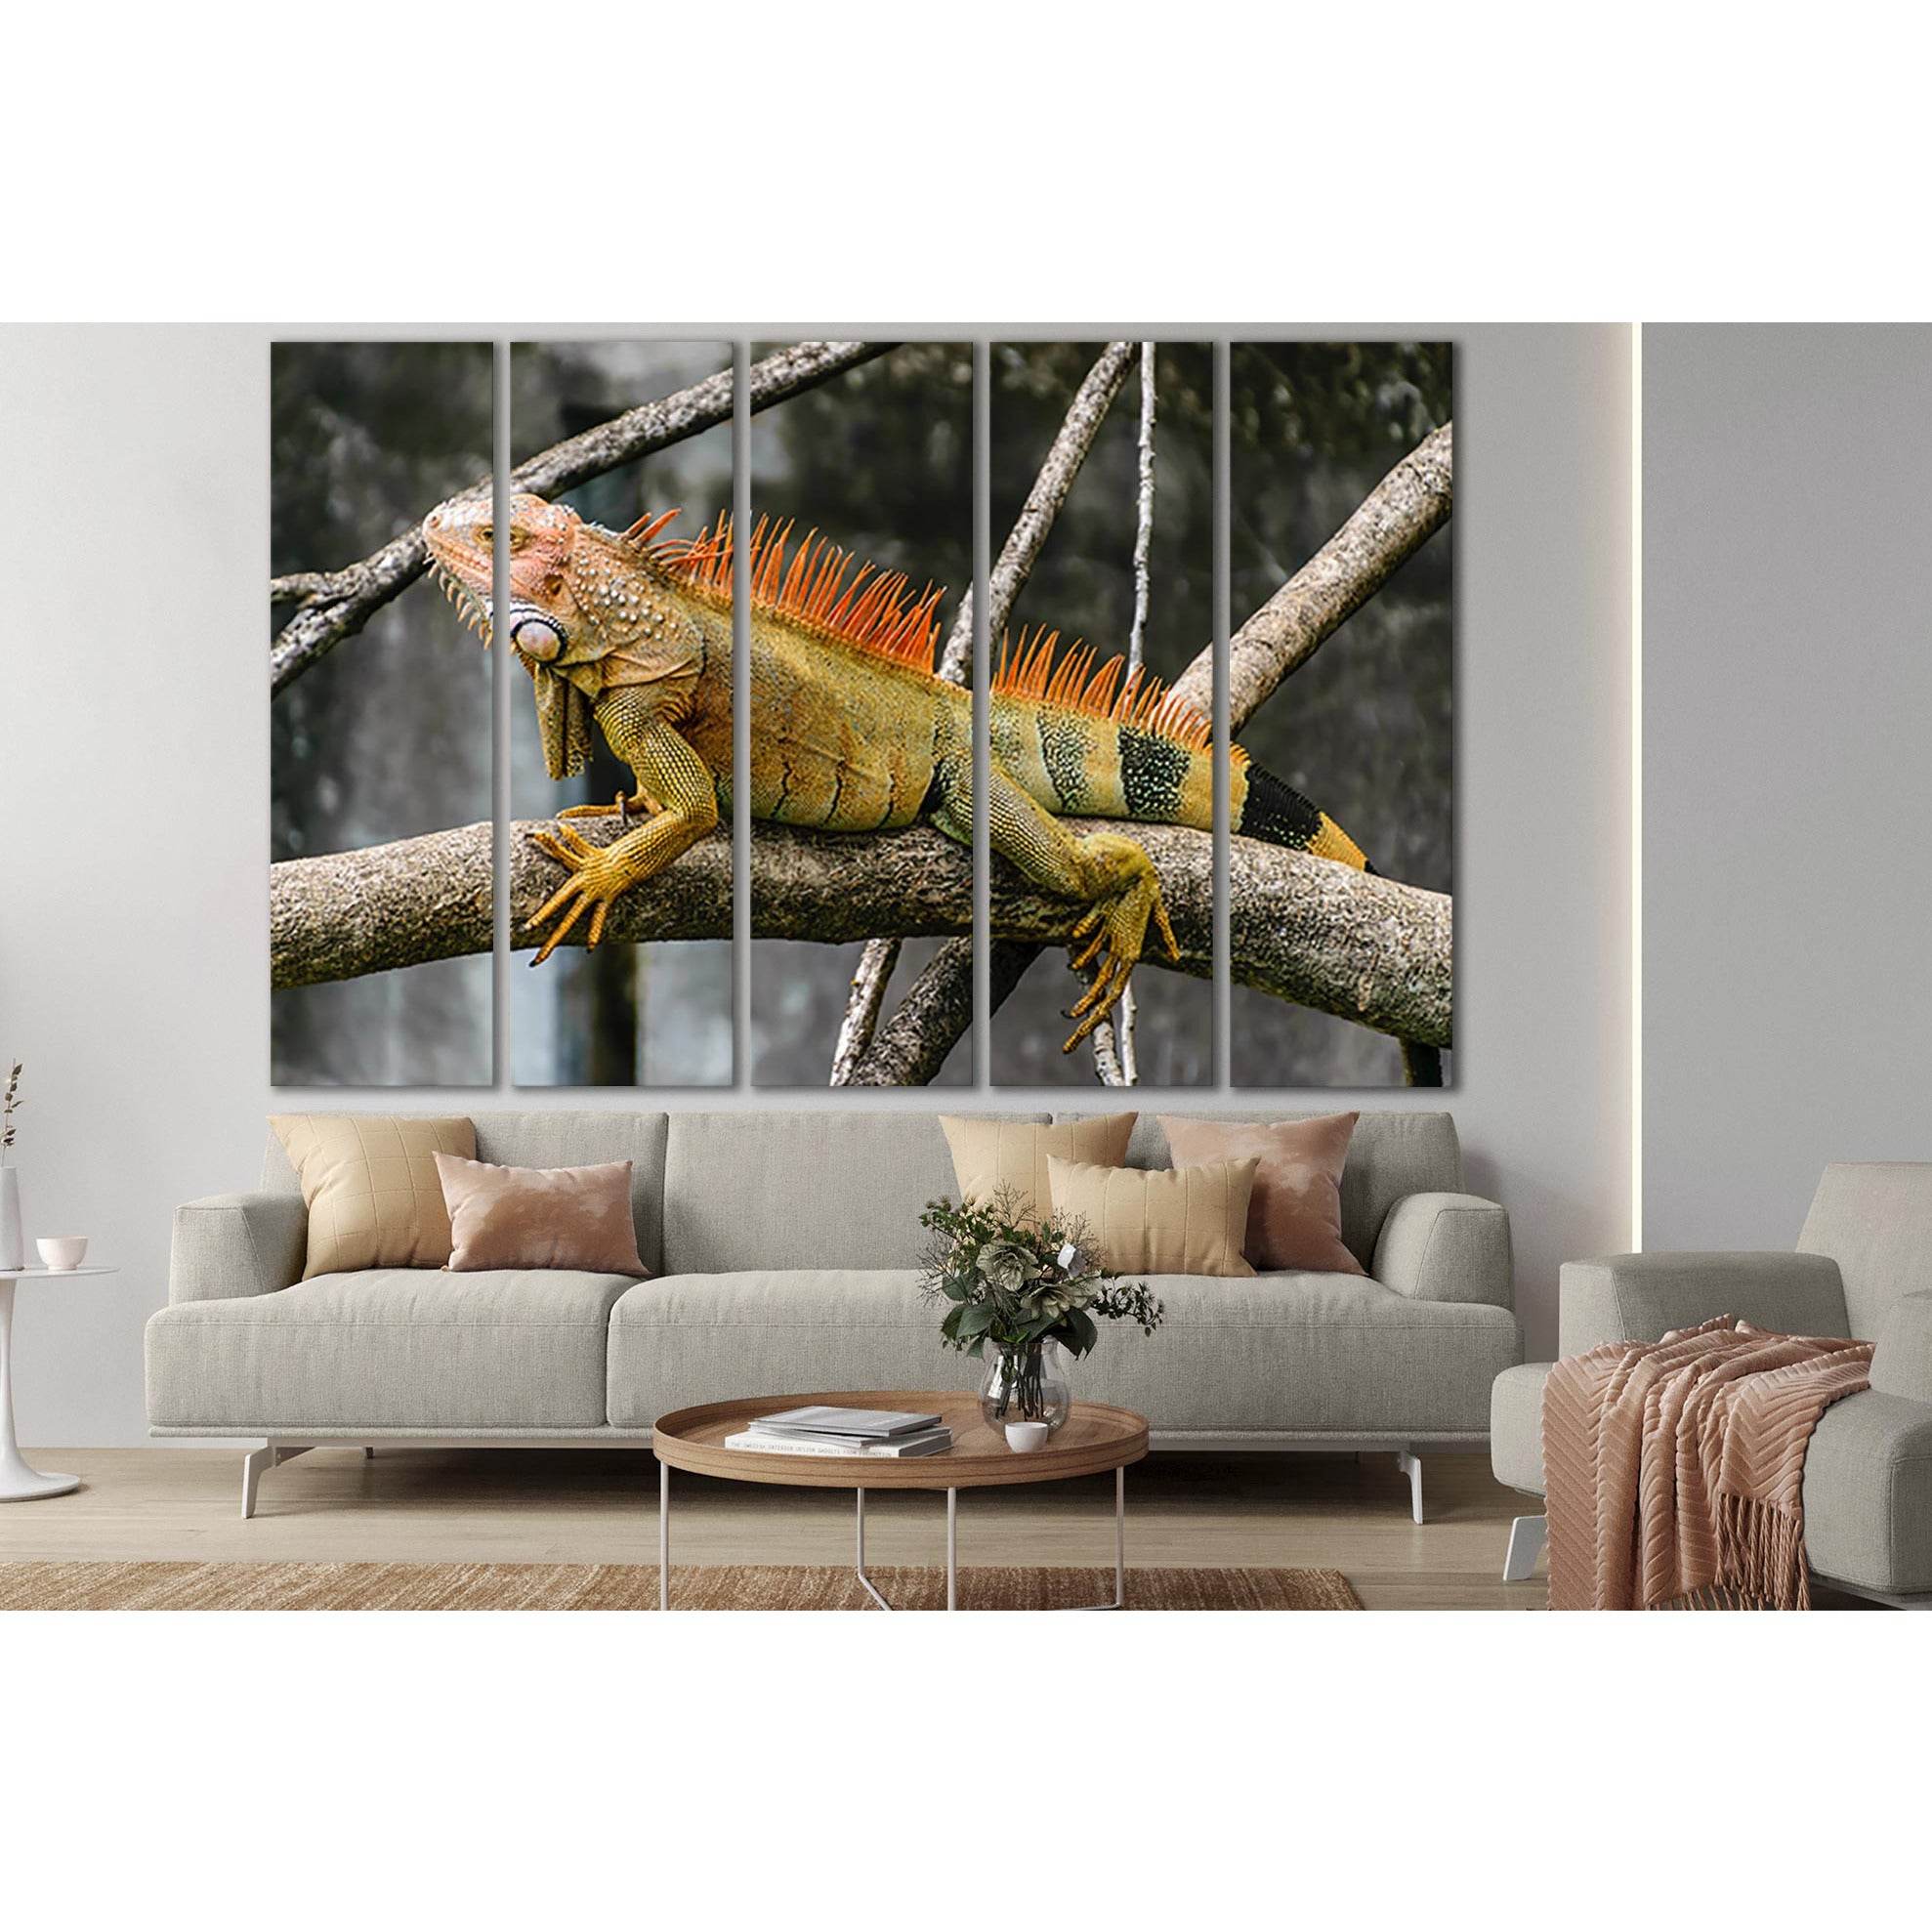 Iguana Sitting On A Branch №SL1506 Ready to Hang Canvas Print